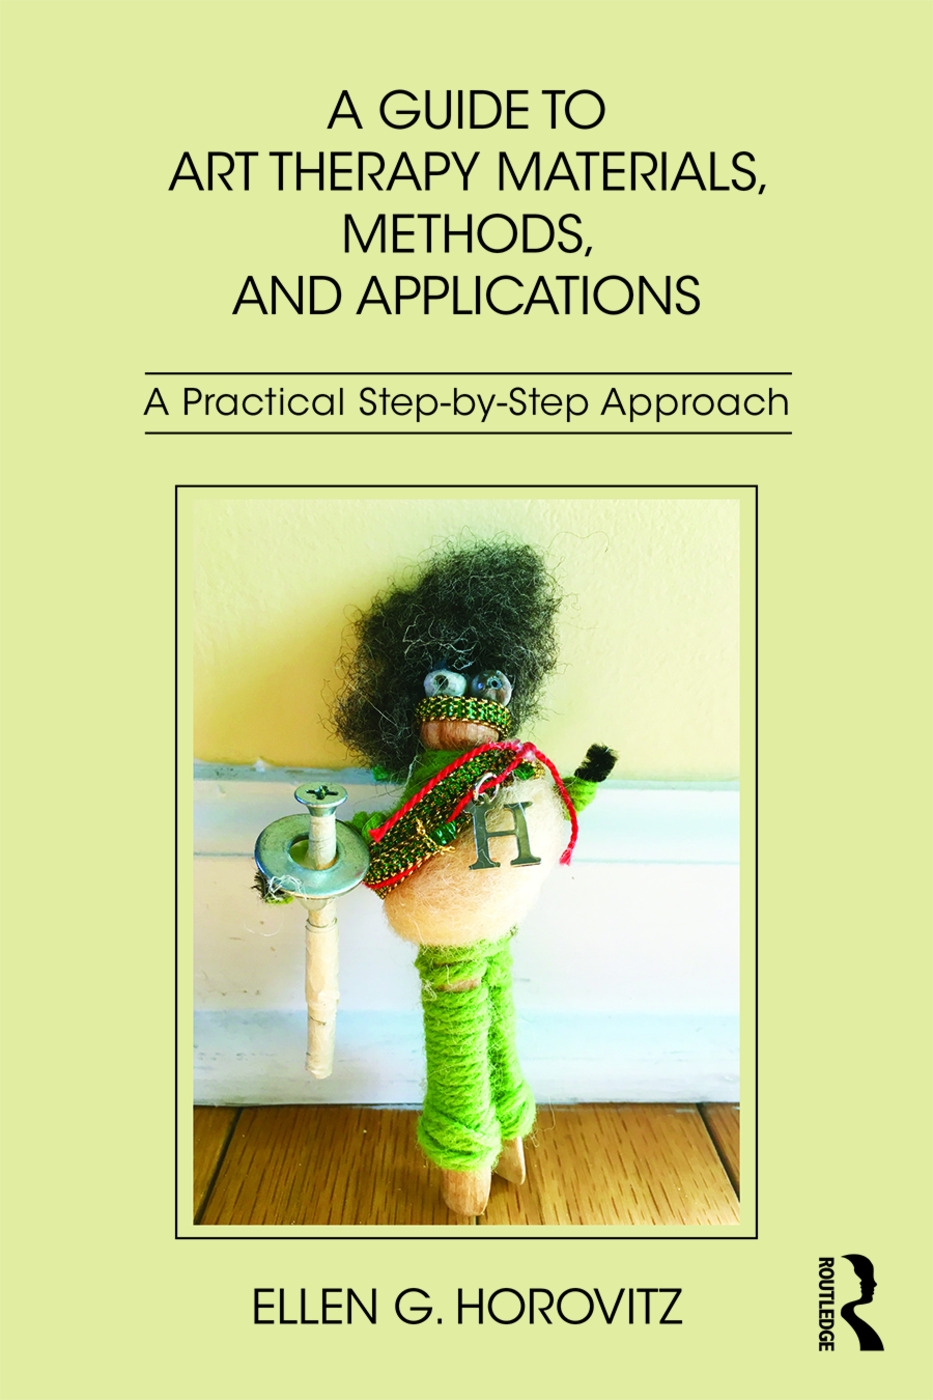 A Guide to Art Therapy Materials, Methods, and Applications: A Practical Step-By-Step Approach